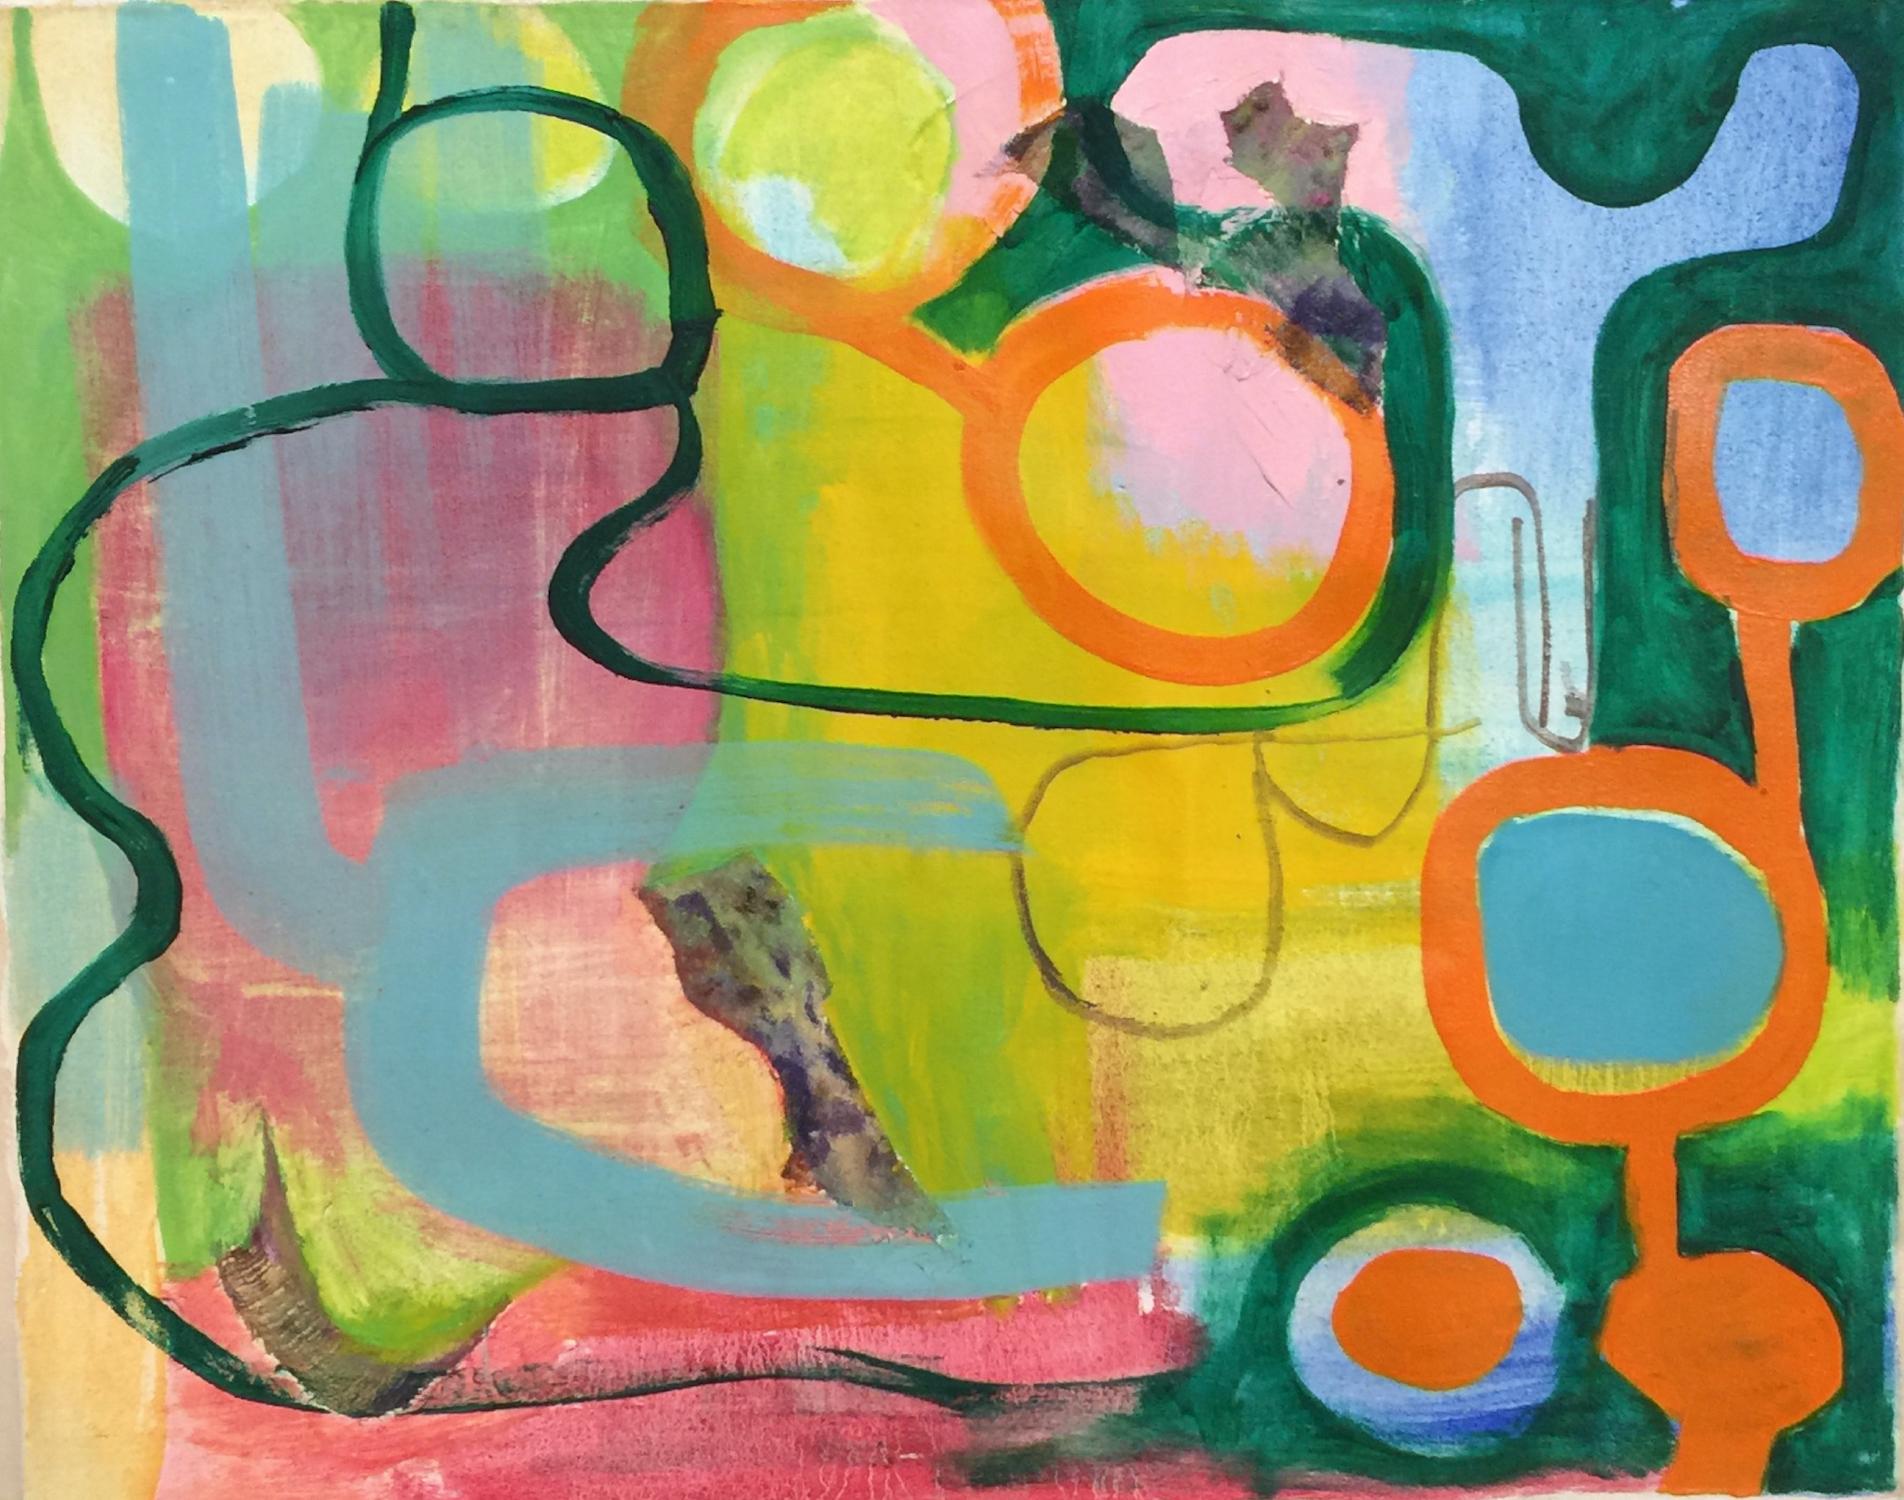 Cecilia André Abstract Painting - Sertão, colorful contemporary gestural abstract in yellow, green, blue, orange